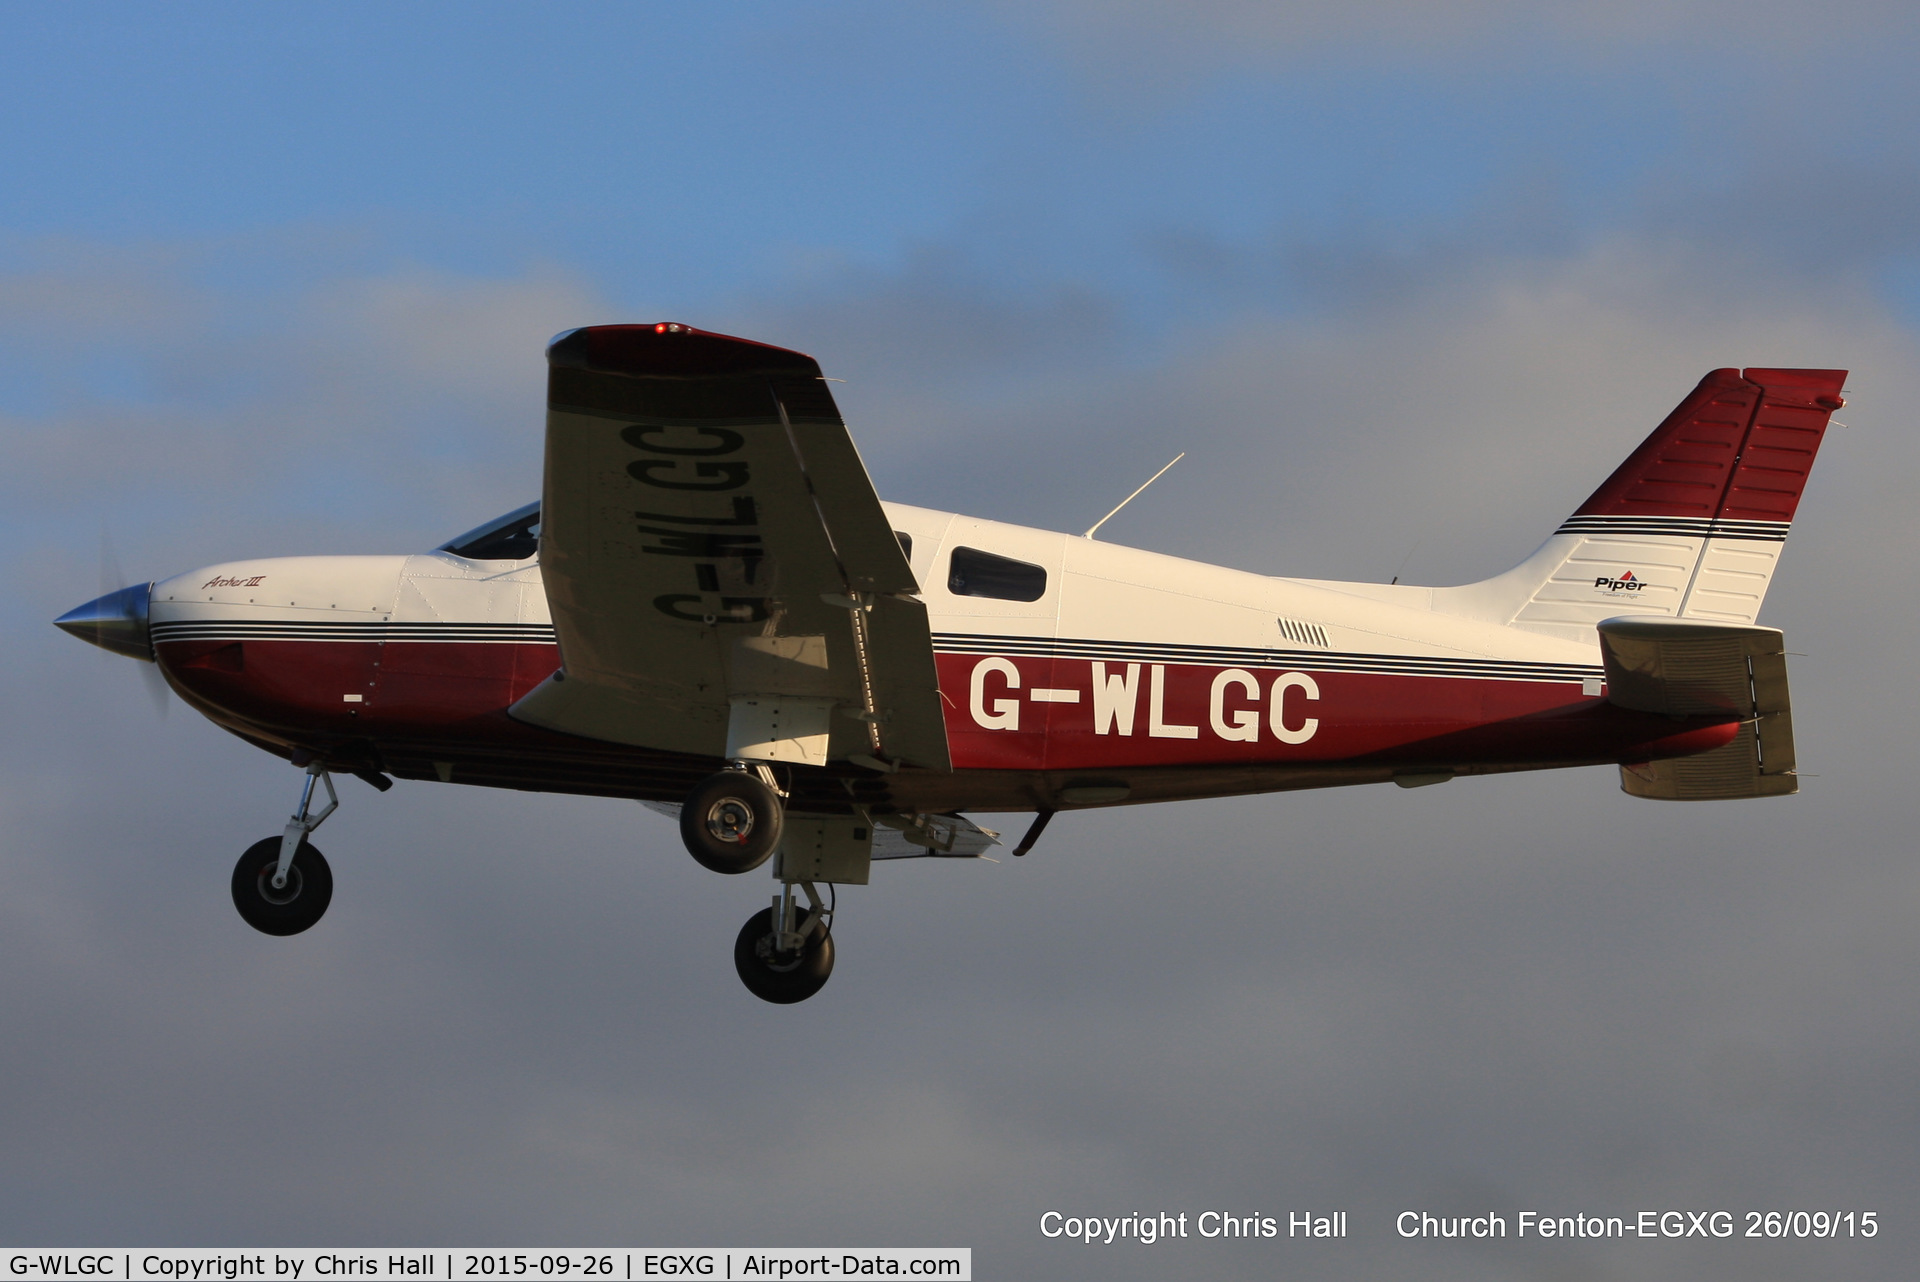 G-WLGC, 2001 Piper PA-28-181 Cherokee Archer III C/N 2843484, at the Yorkshire Airshow